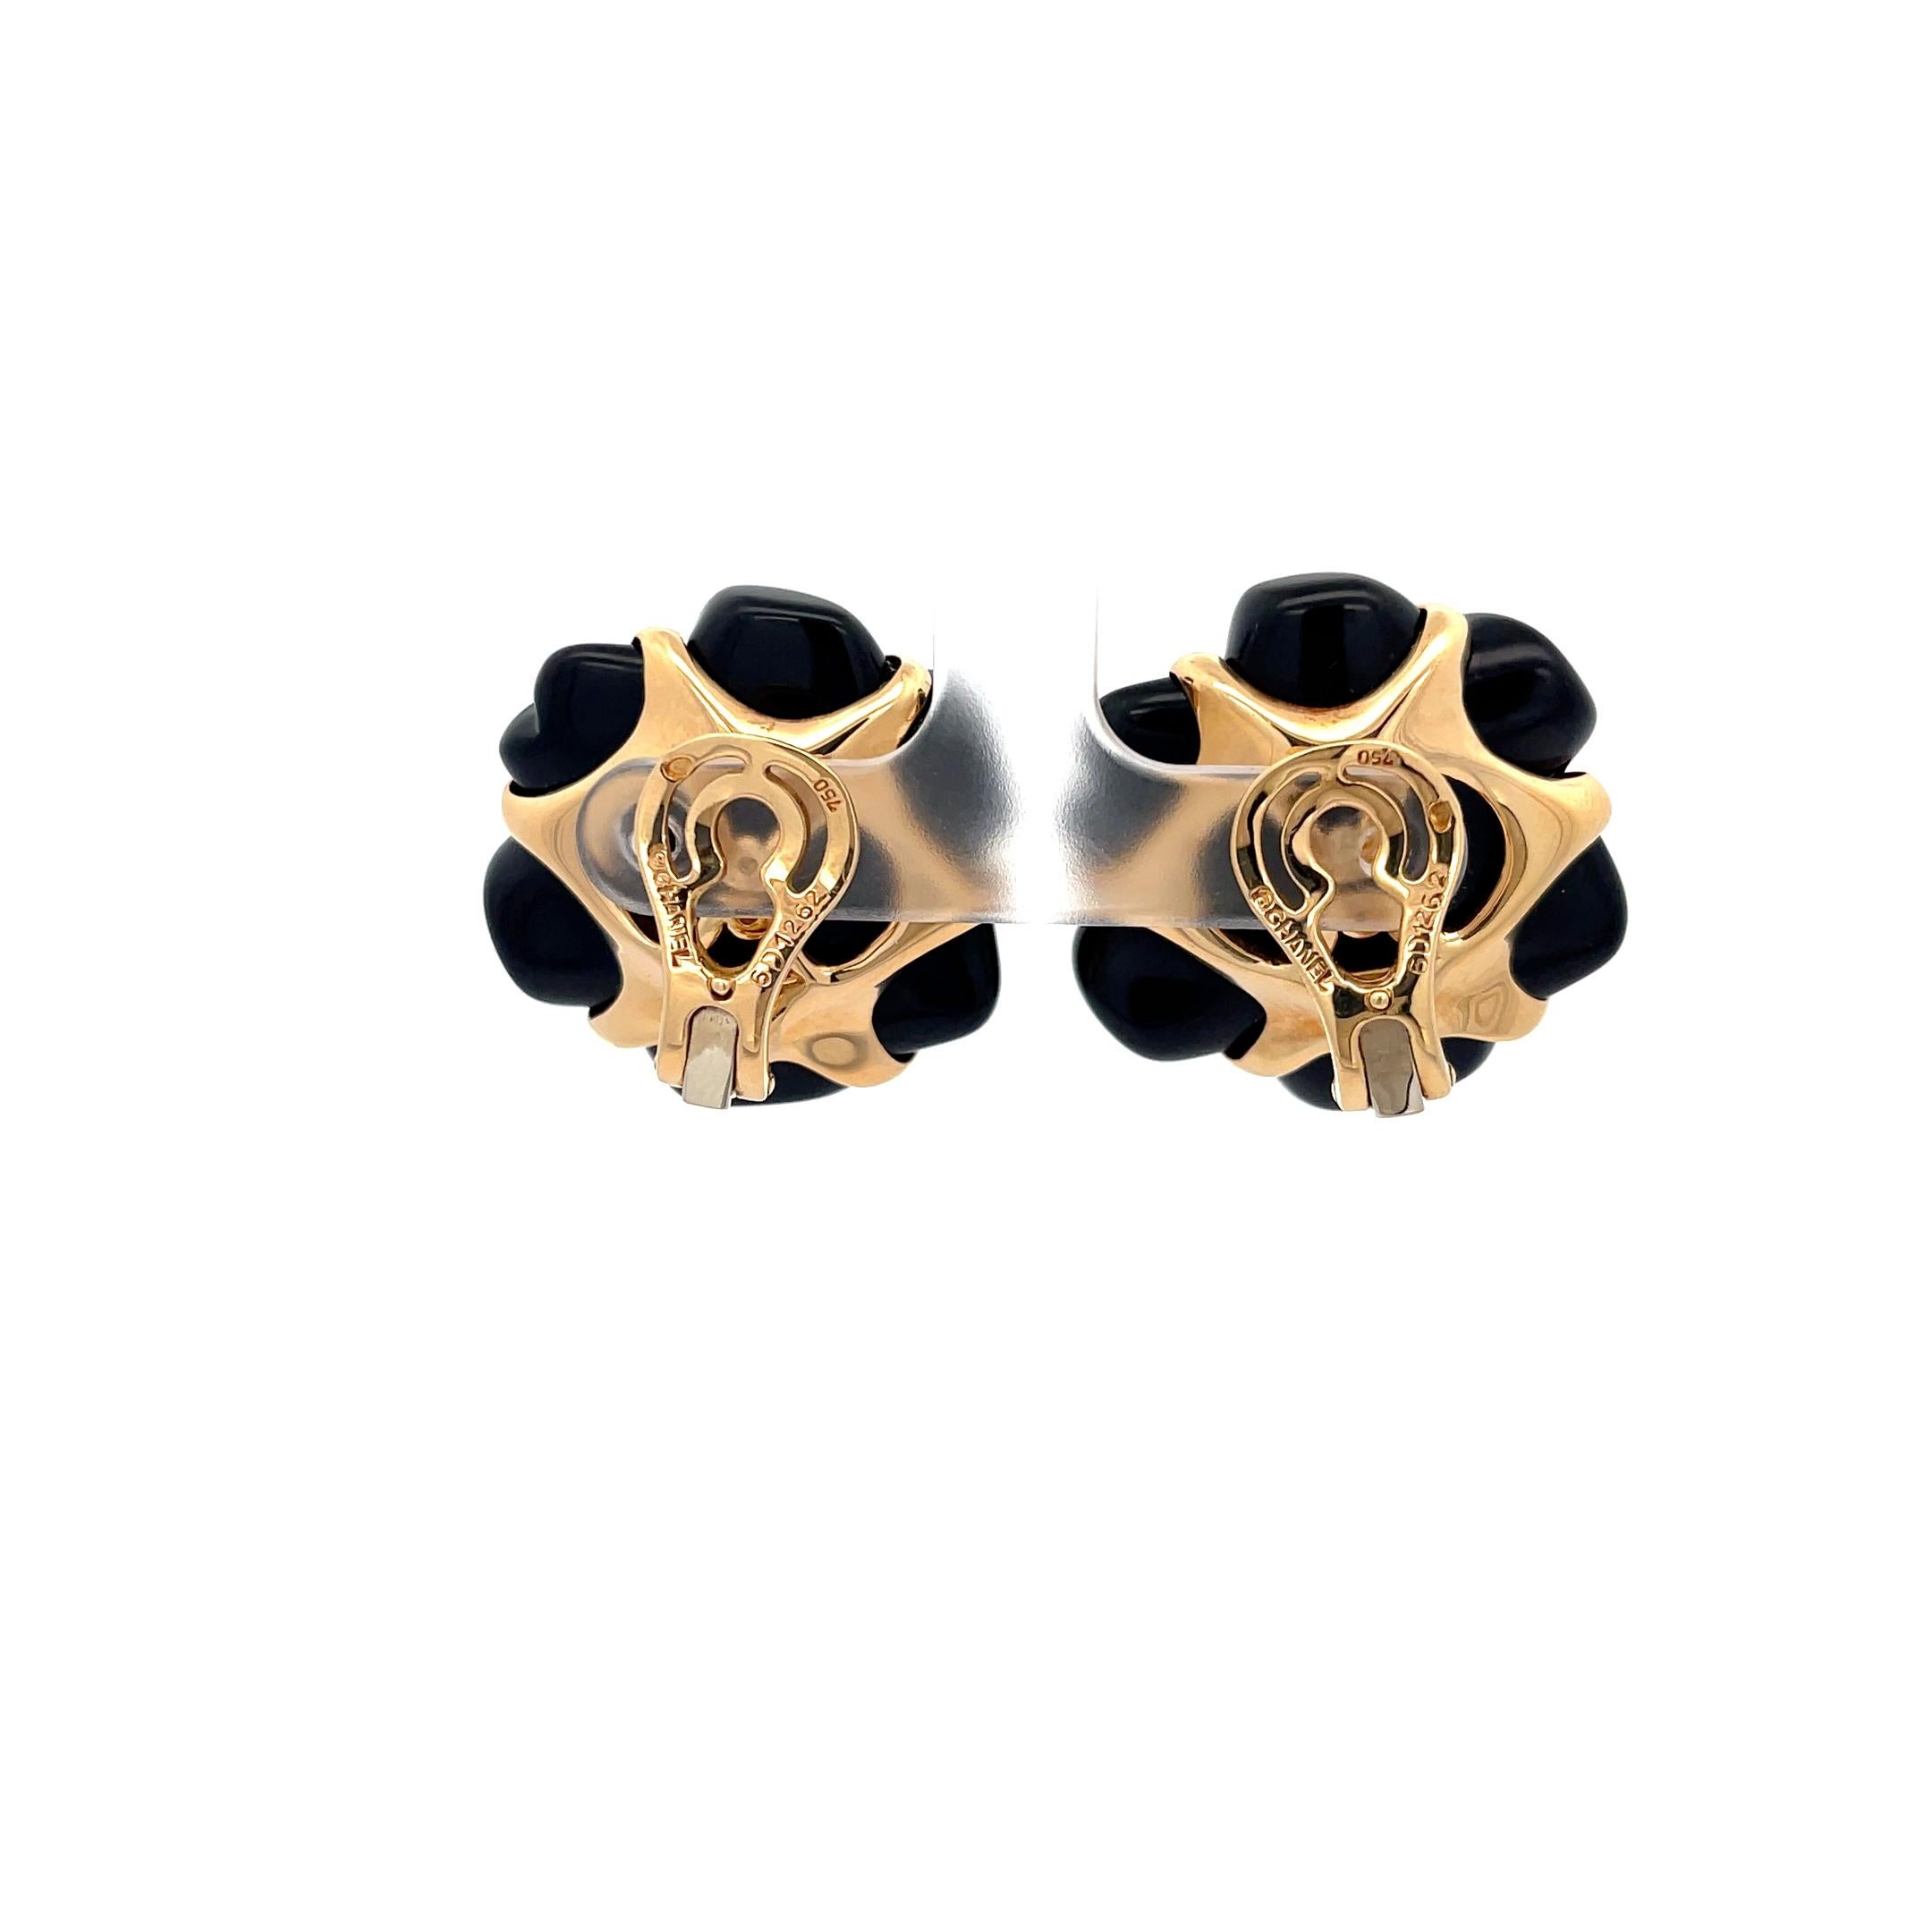 Contemporary Estate Chanel Camelia Black Agate Earrings 18K Yellow Gold